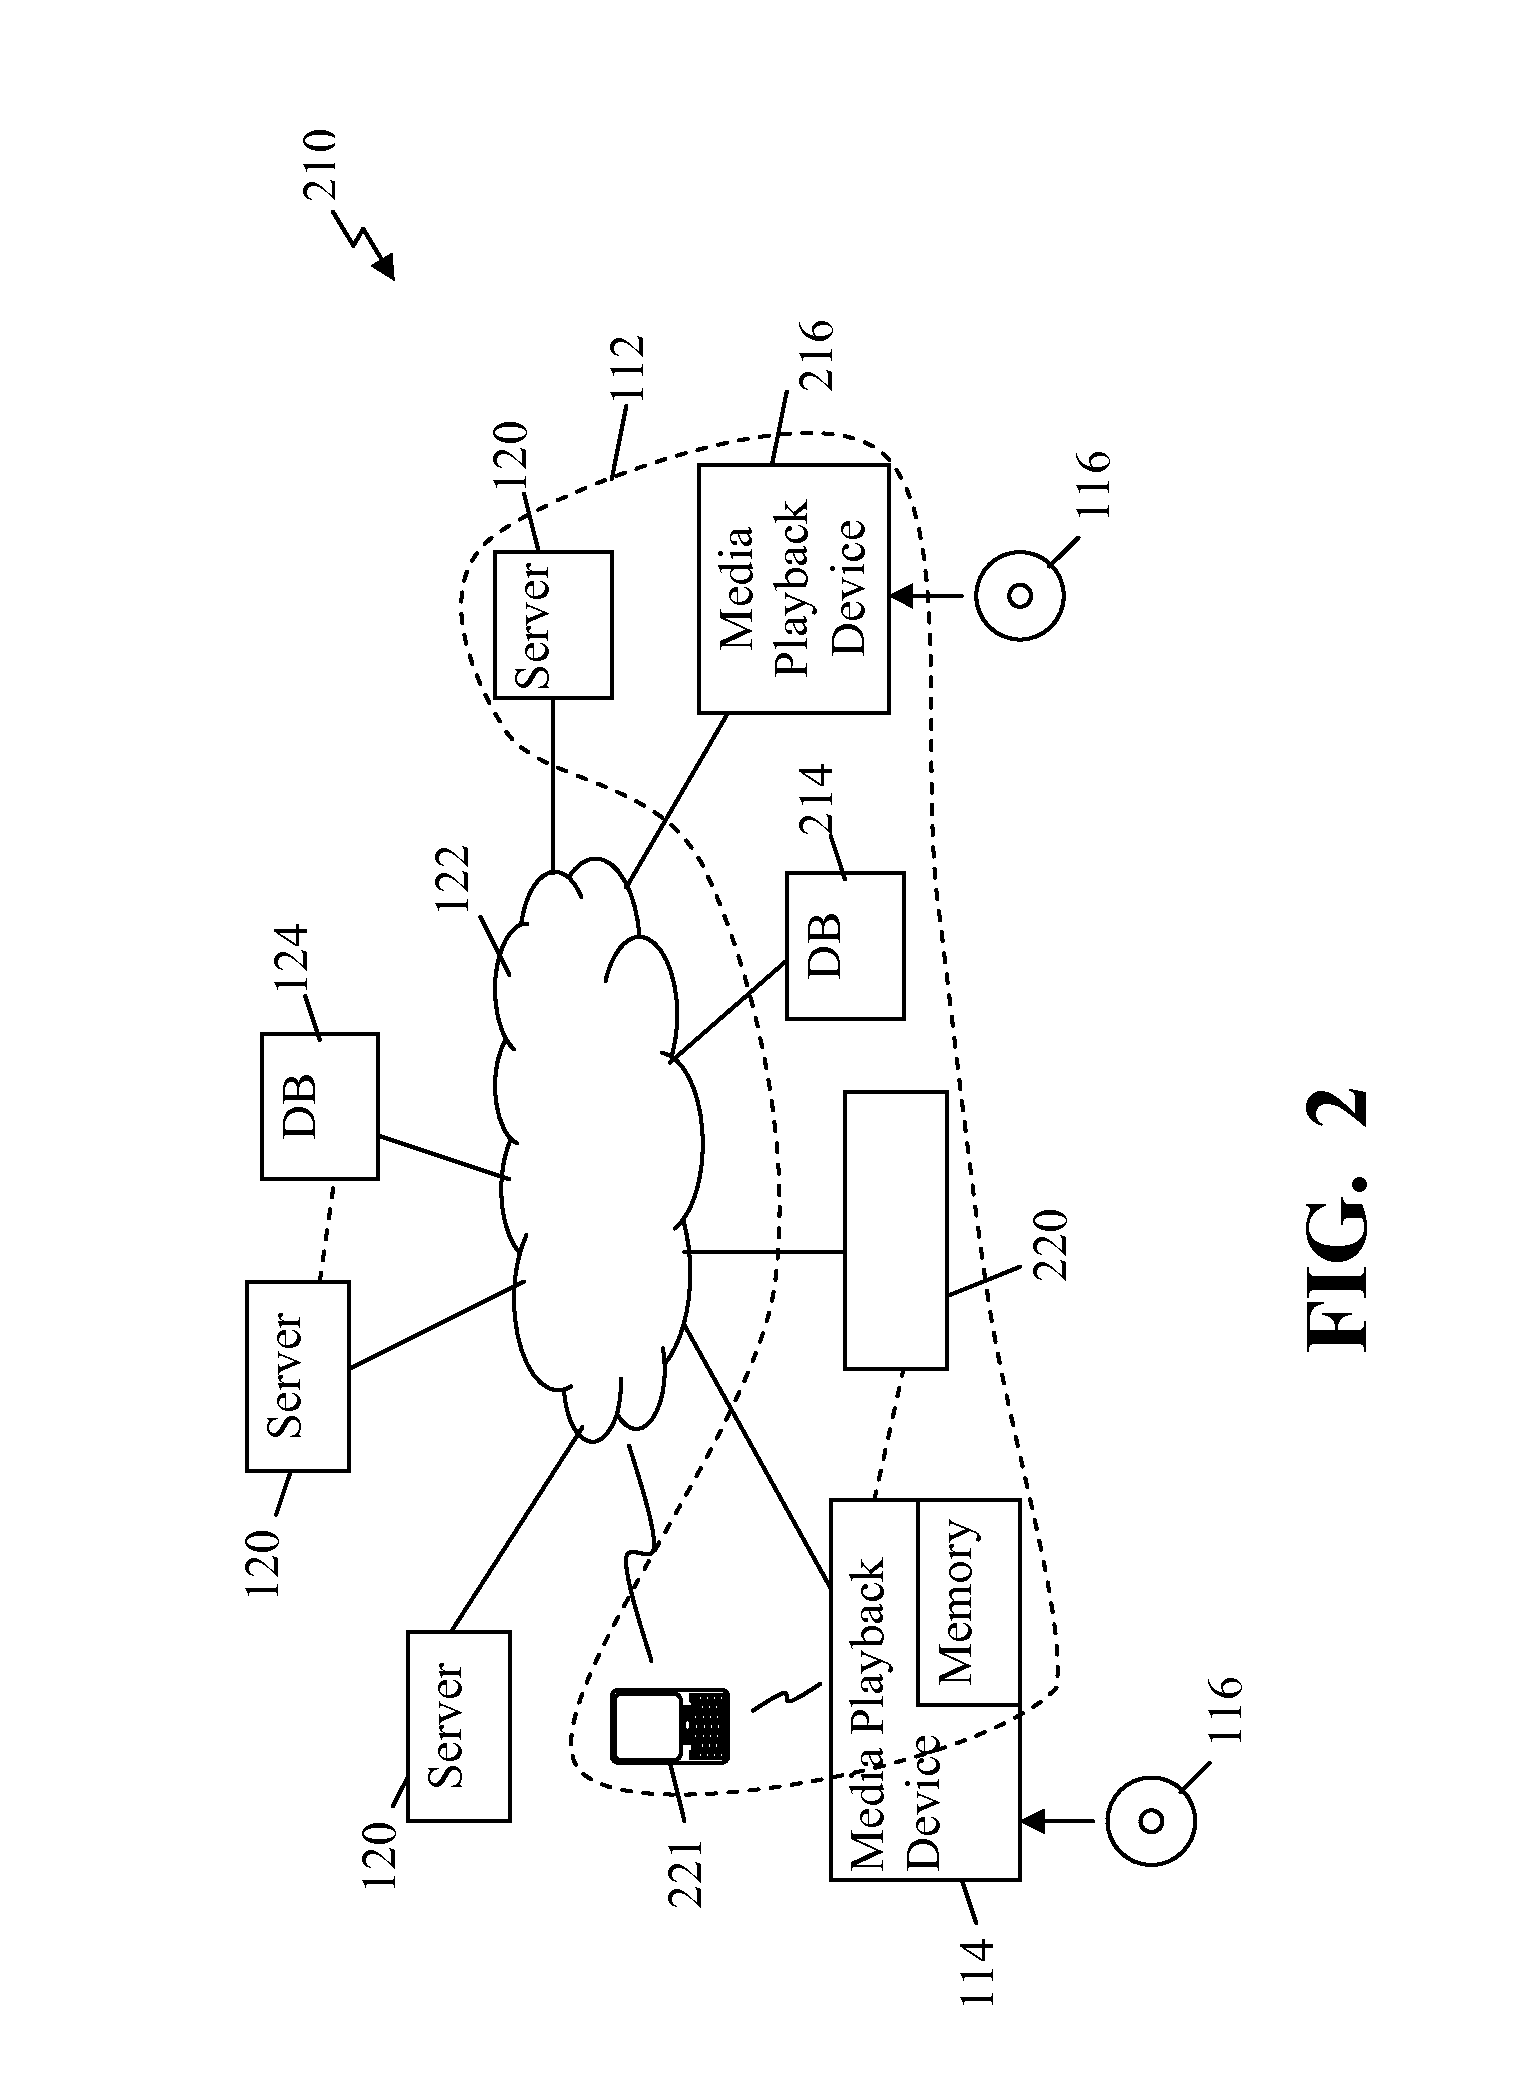 Methods and systems of dynamically managing content for use by a media playback device